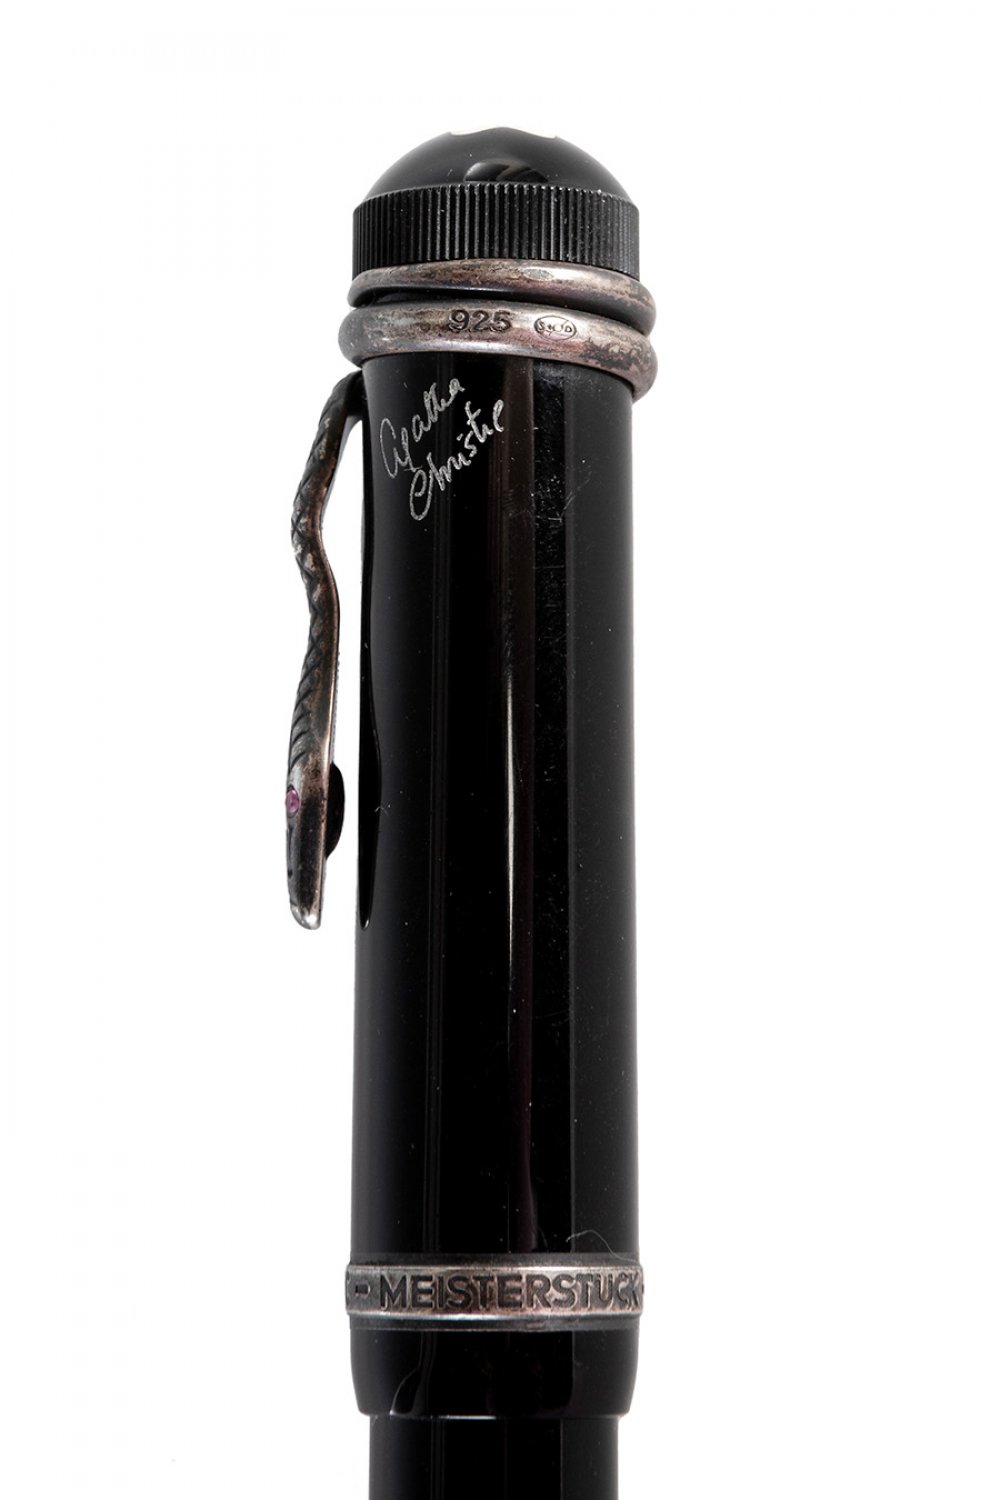 MONTBLANC Agatha Christie pen. Limited edition.Black resin barrel and cap inspired by a classic - Image 3 of 4